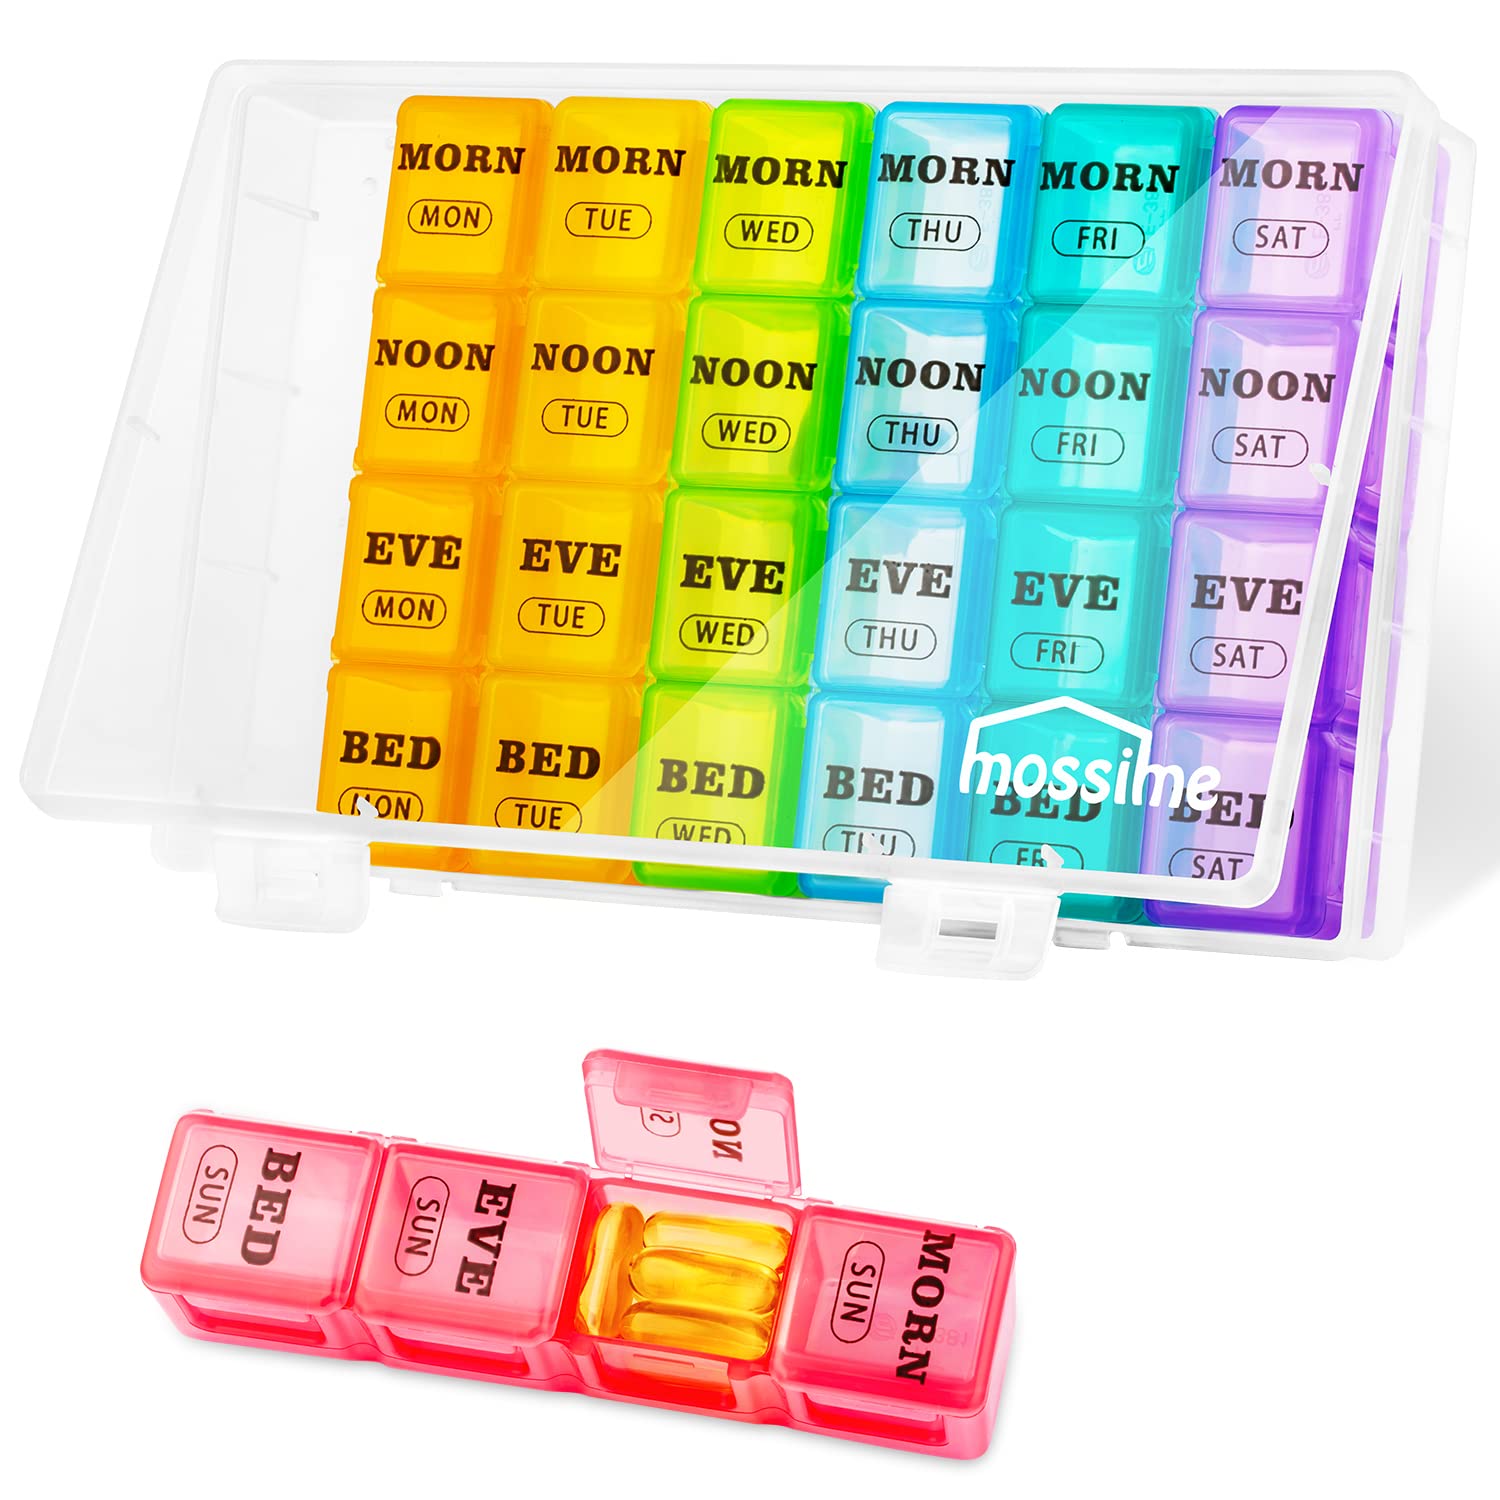 Extra Large Weekly Pill Organizer 7 Day AM/PM Pill Case Box Planner For  Vitamins